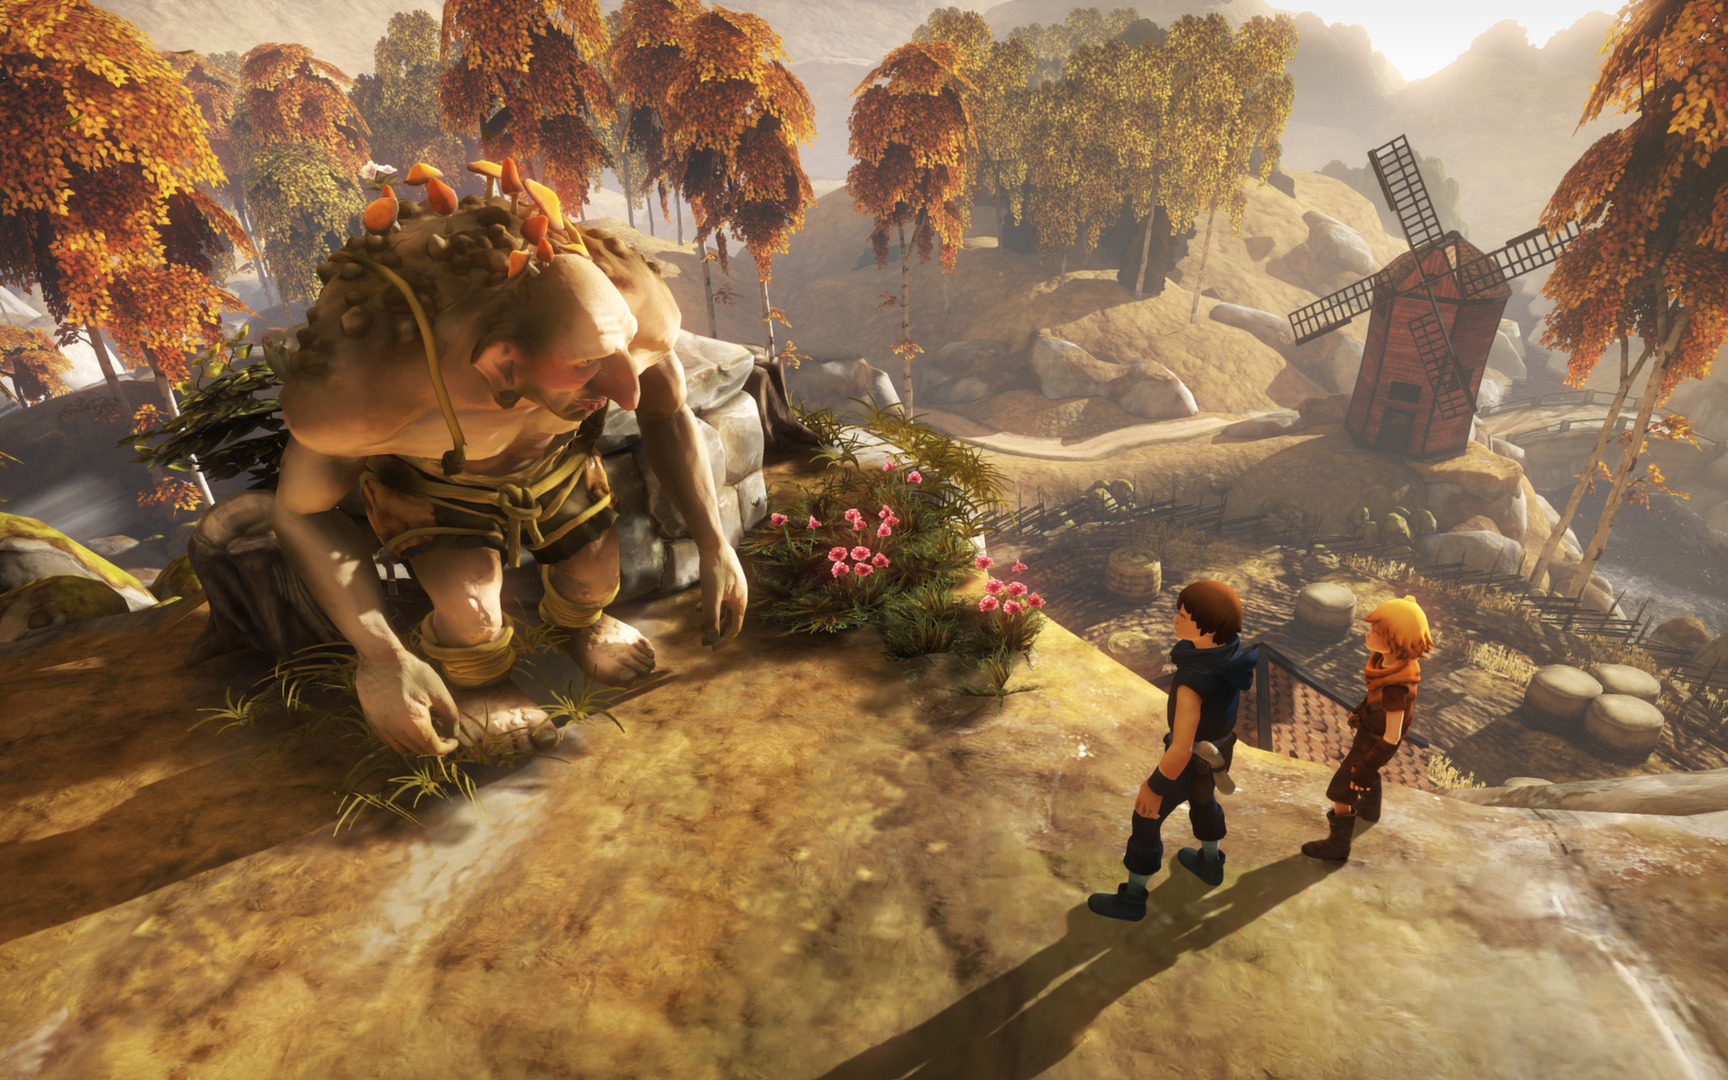 download brothers a tale of two sons for free